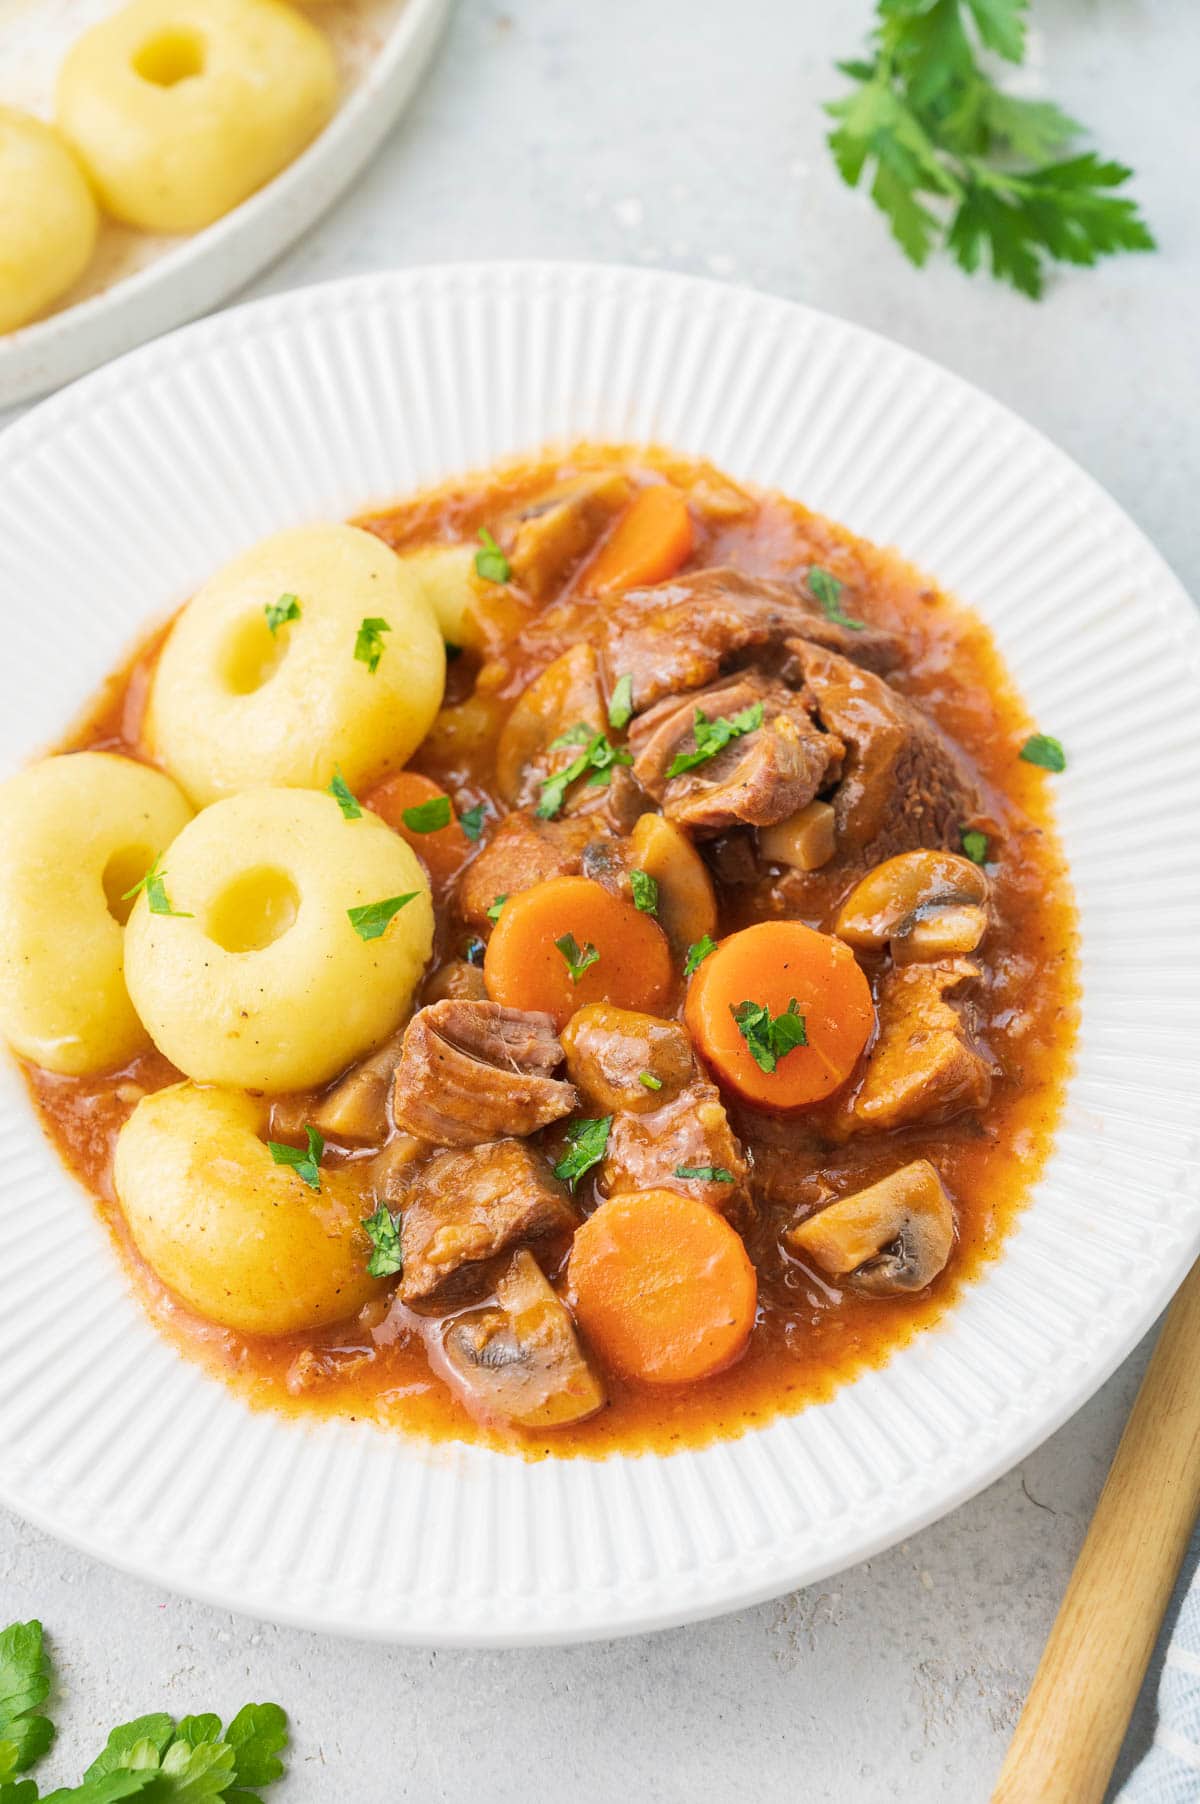 Pork stew served with dumplings on a white plate.